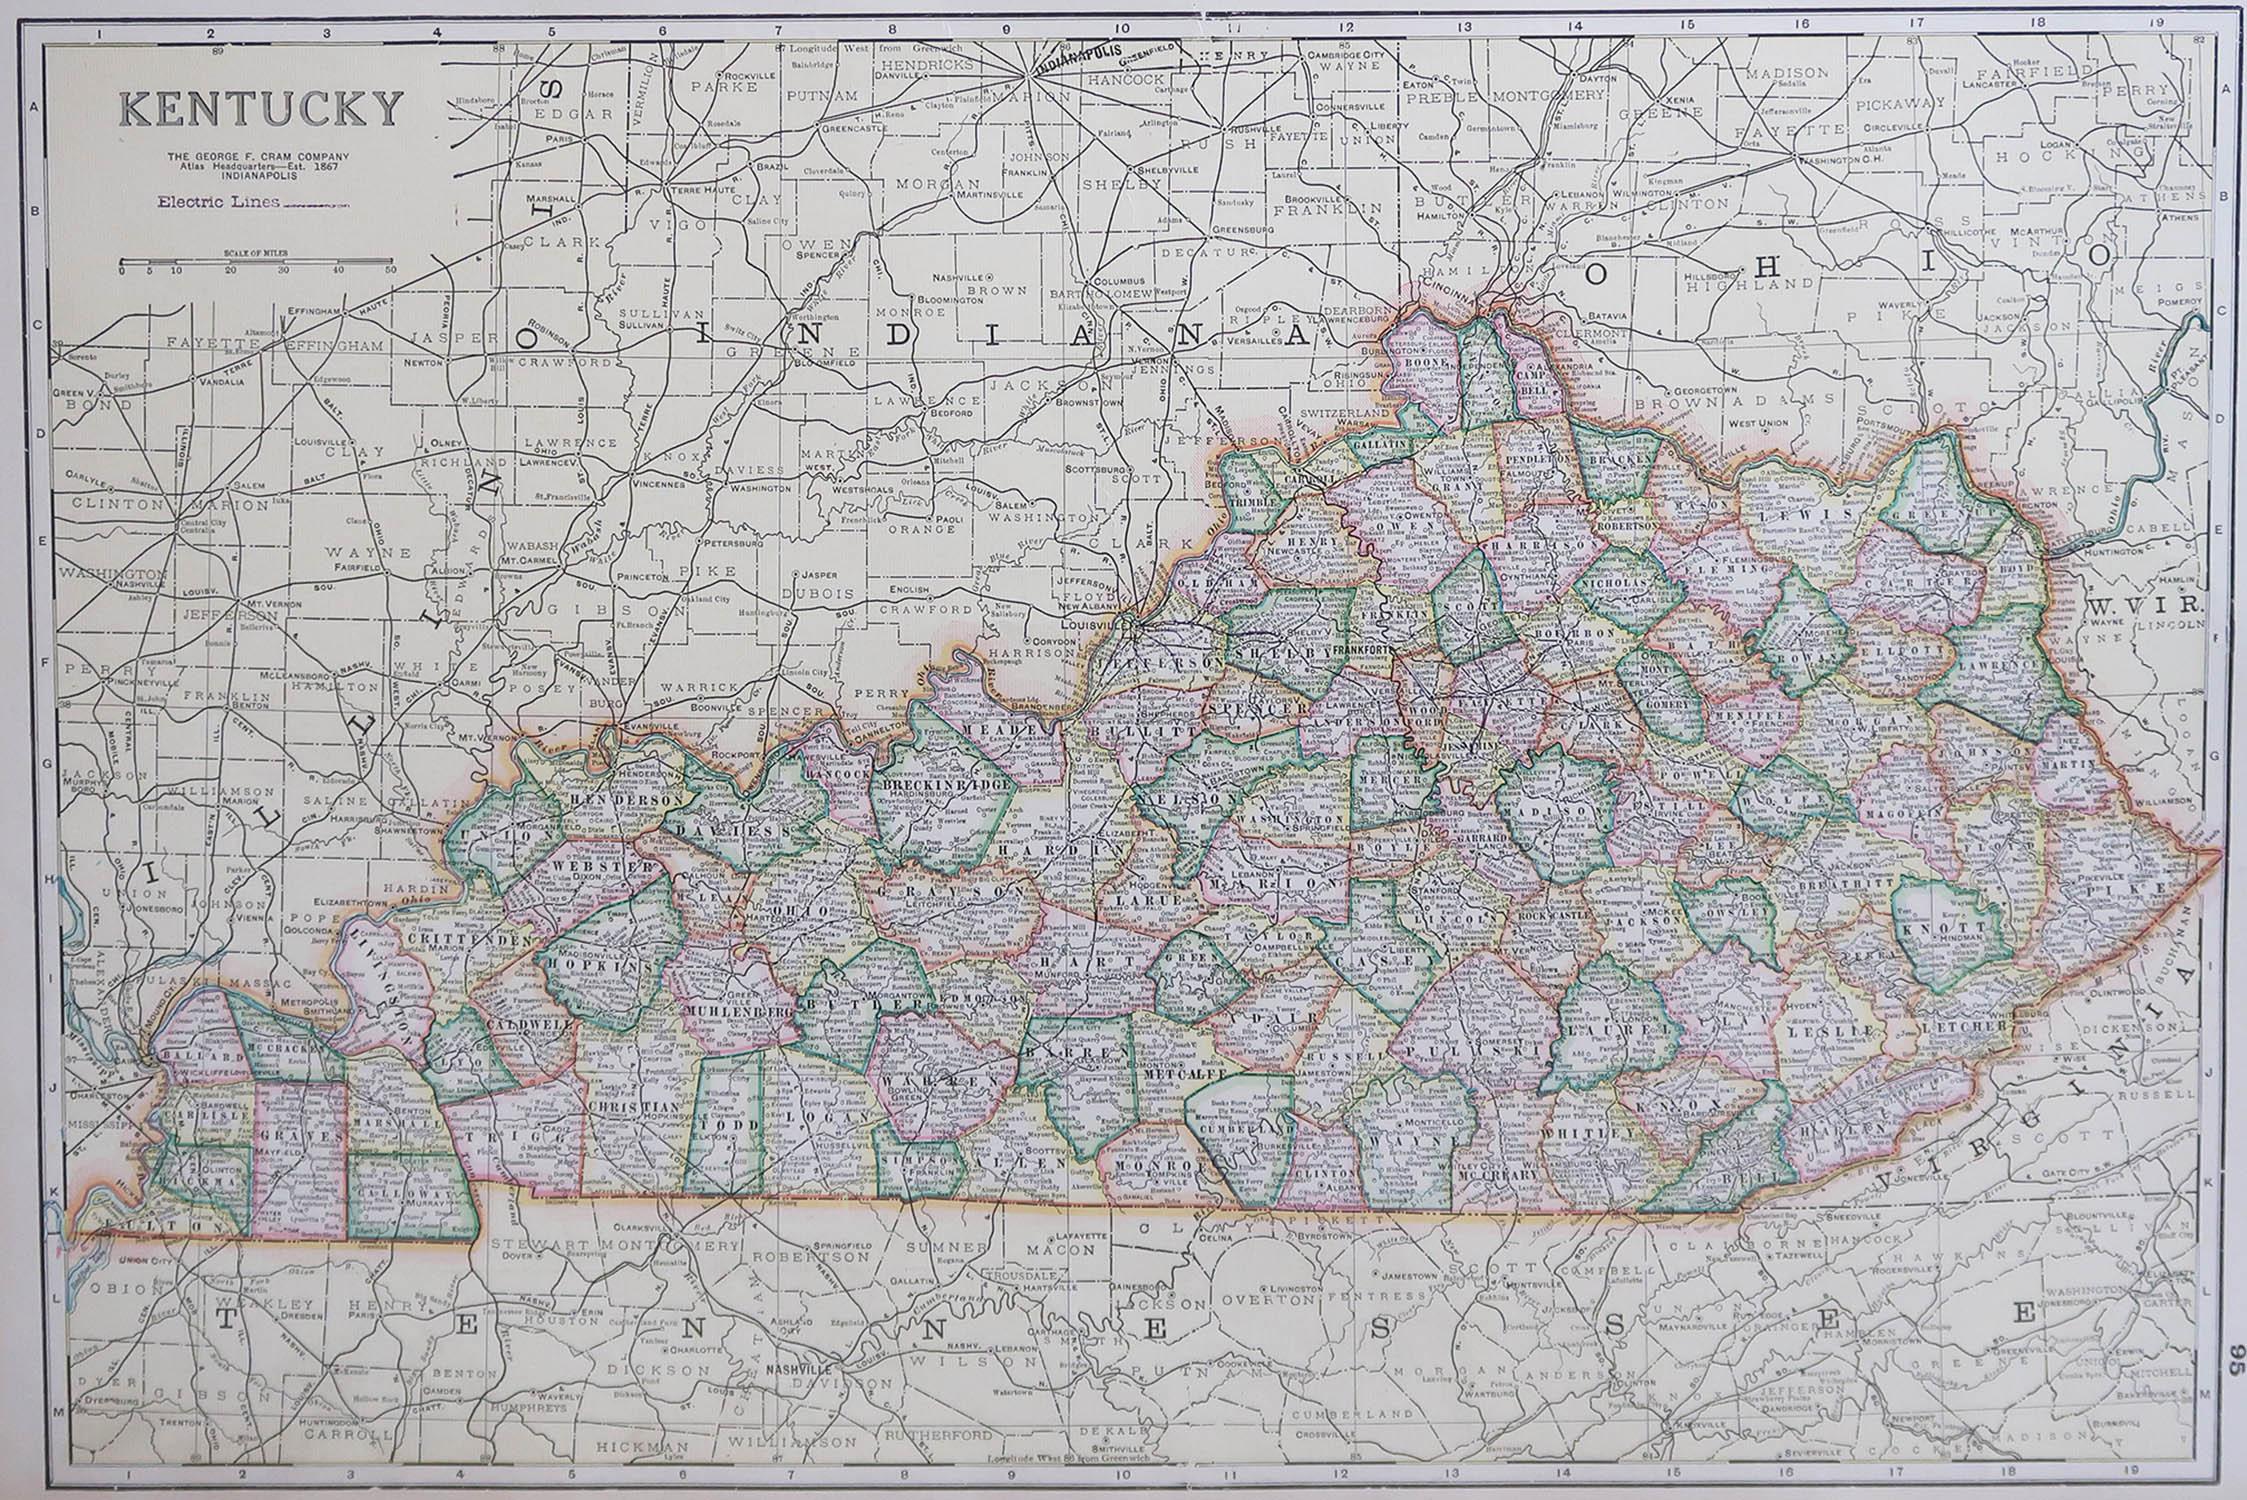 Fabulous map of Kentucky

Original color

Engraved and printed by the George F. Cram Company, Indianapolis.

Published, C.1900

Unframed.